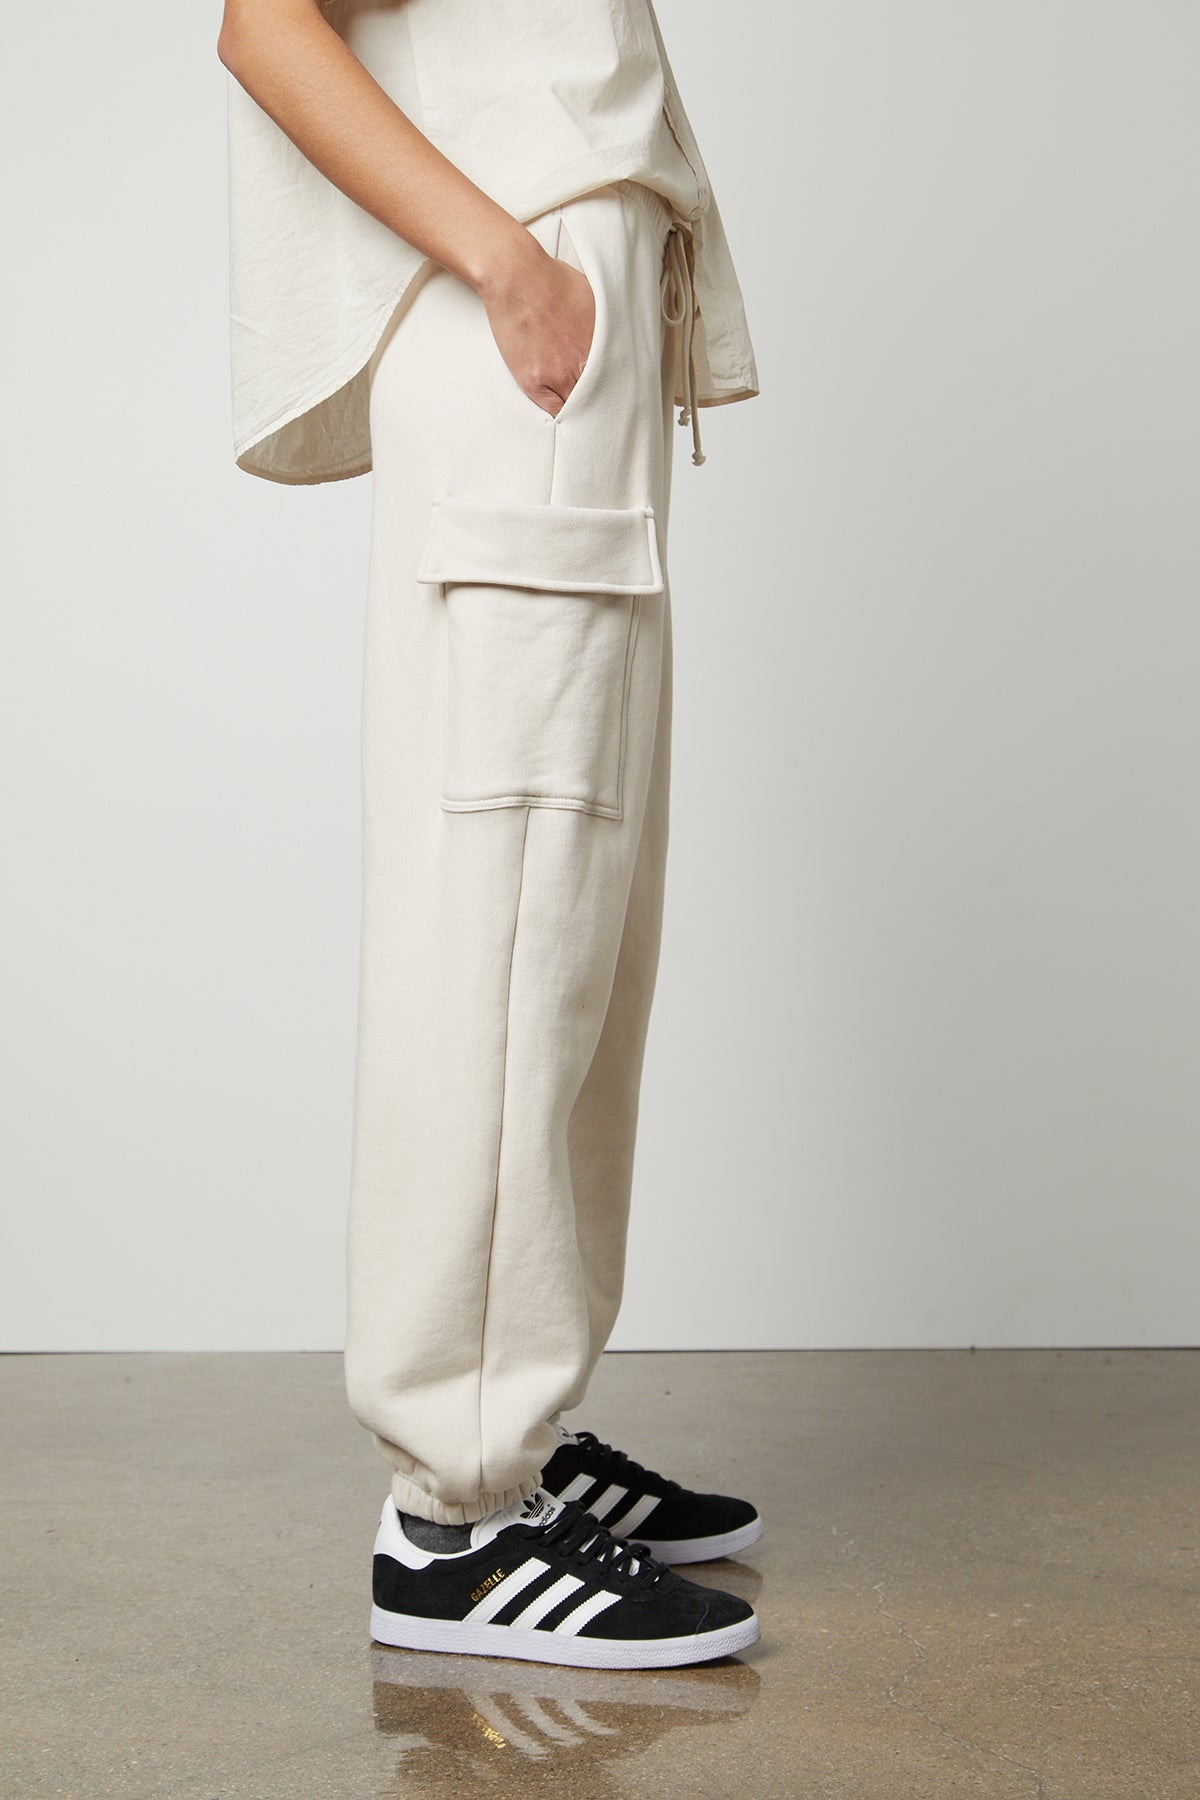 The model is wearing a white LUMI DRAWSTRING WAIST SWEATPANT and black sneakers.-26799843377345